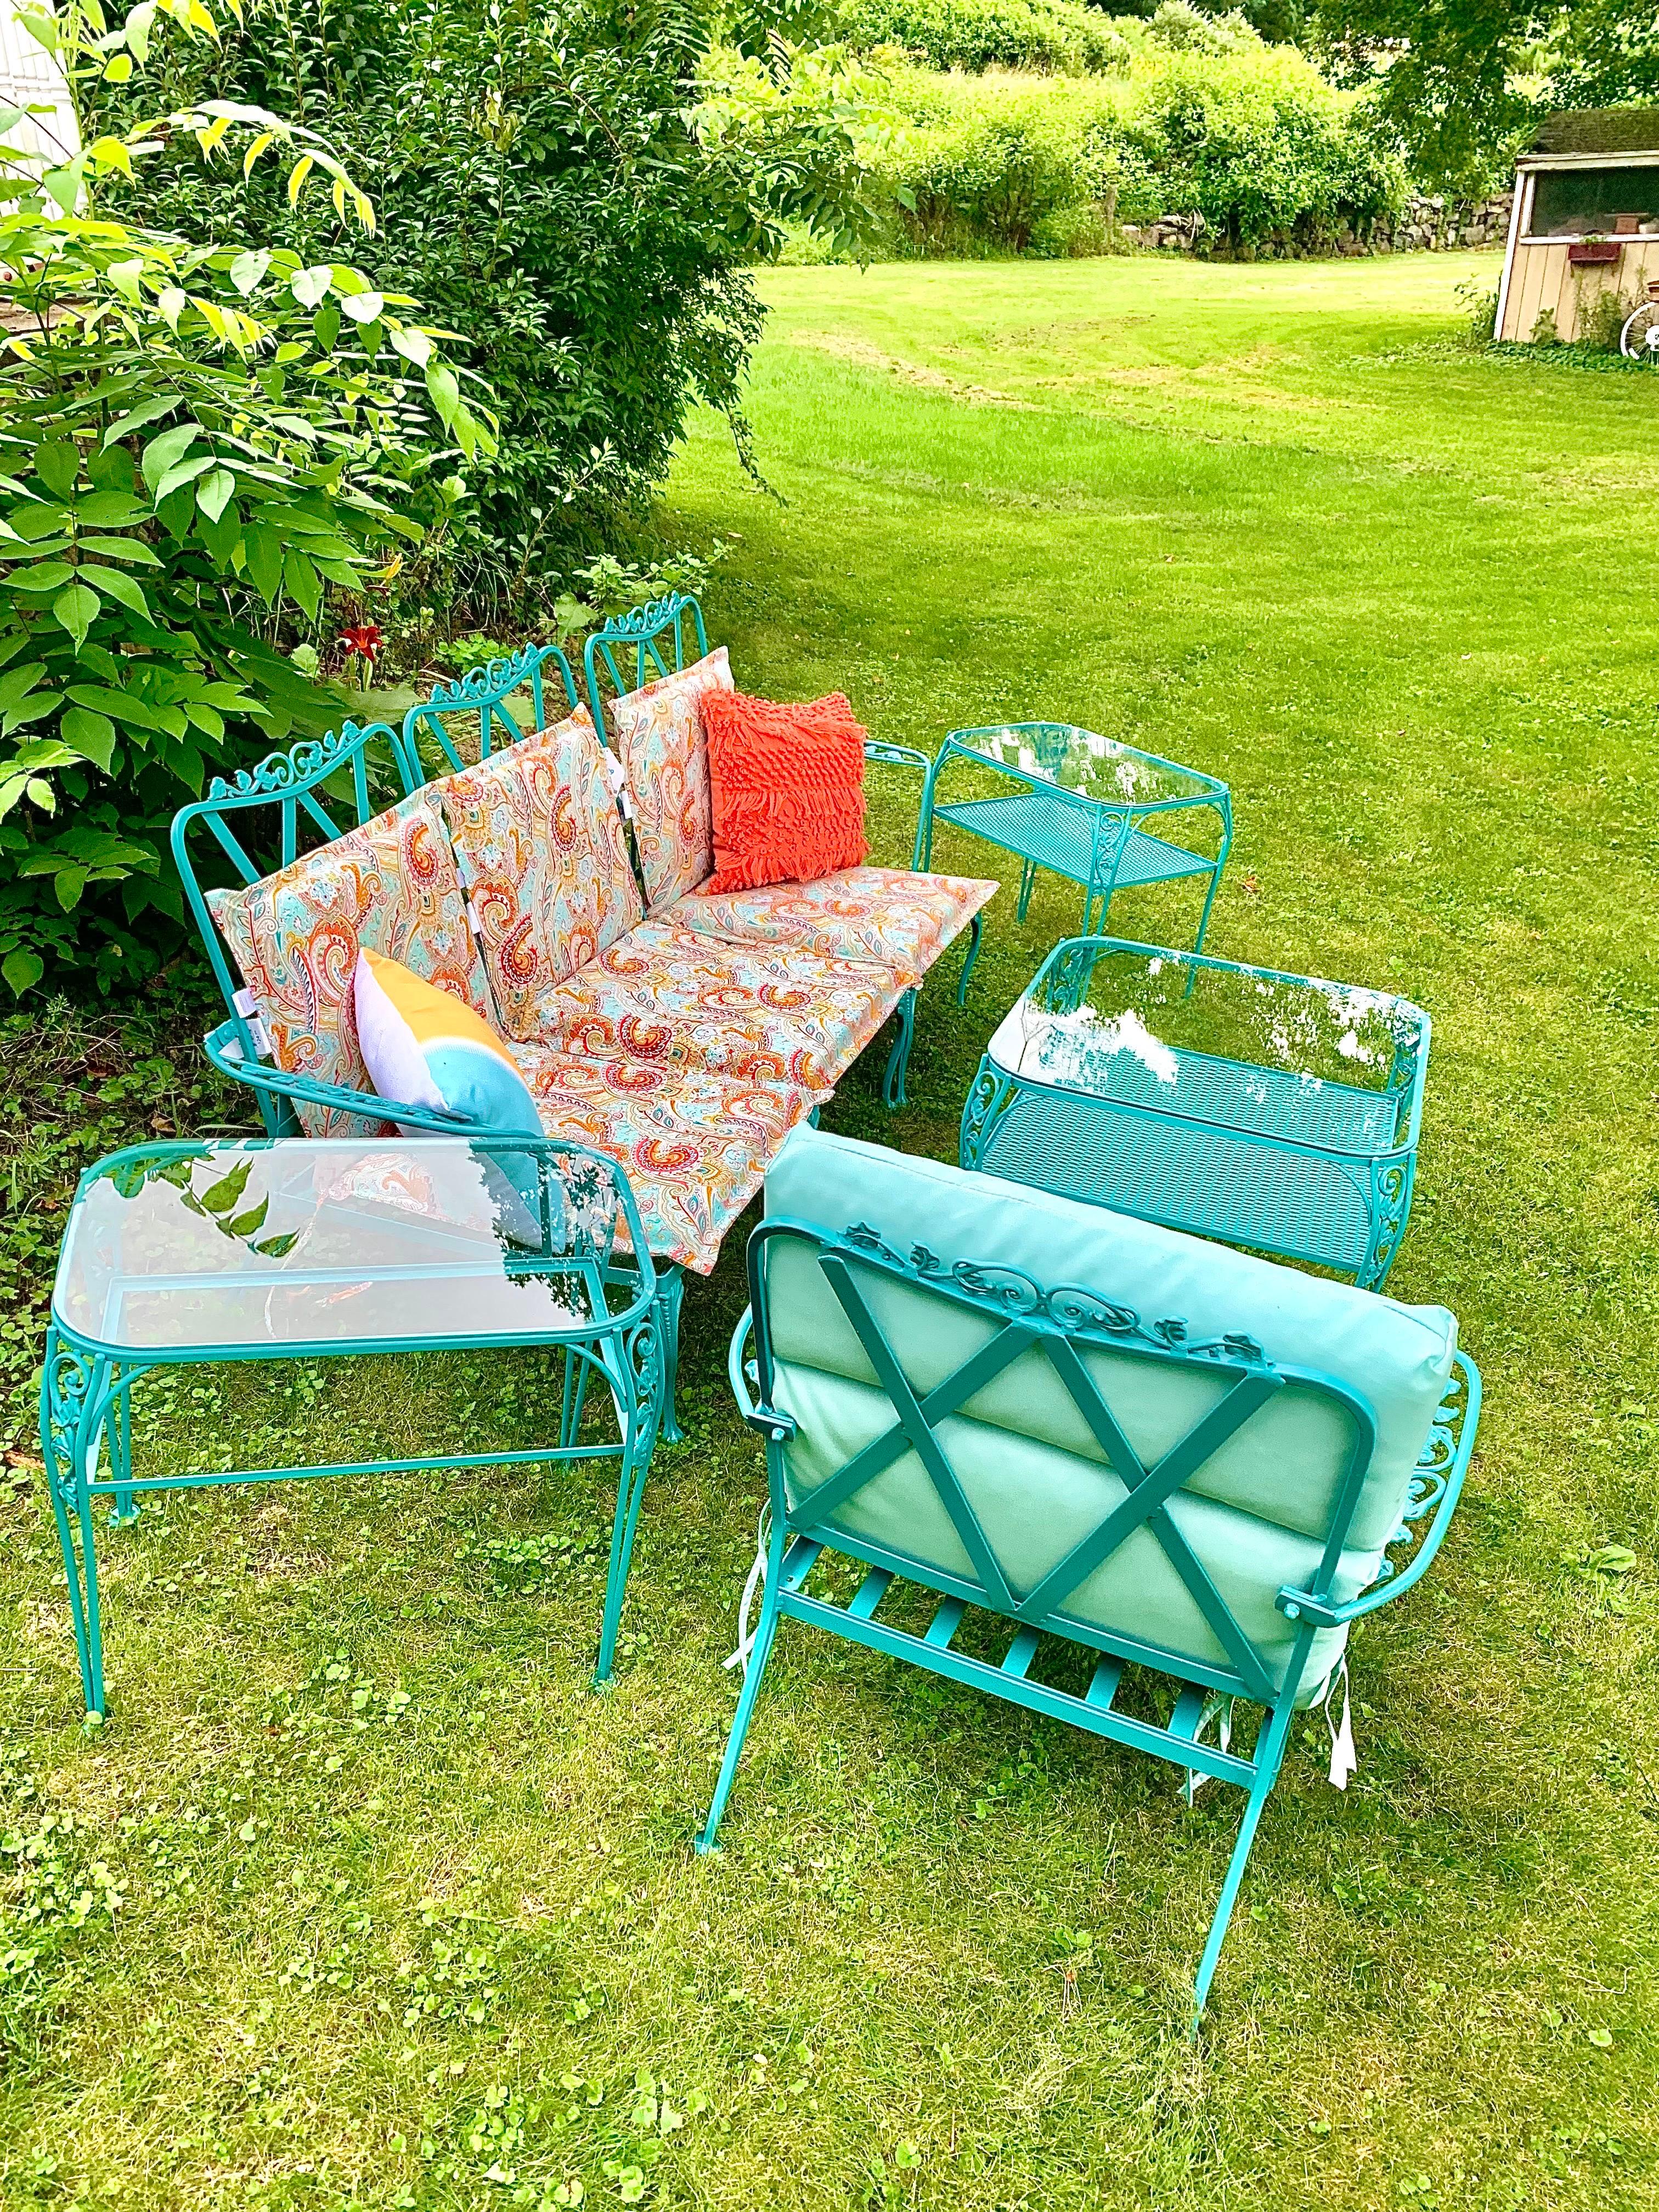 Available now and ready to ship for your enjoyment 

Vintage Wrought Iron Sofa Conversation 9 Piece Set

Add some color and style to your garden, deck, or patio with this carefully curated vintage wrought iron patio set featuring a mix of turquoise